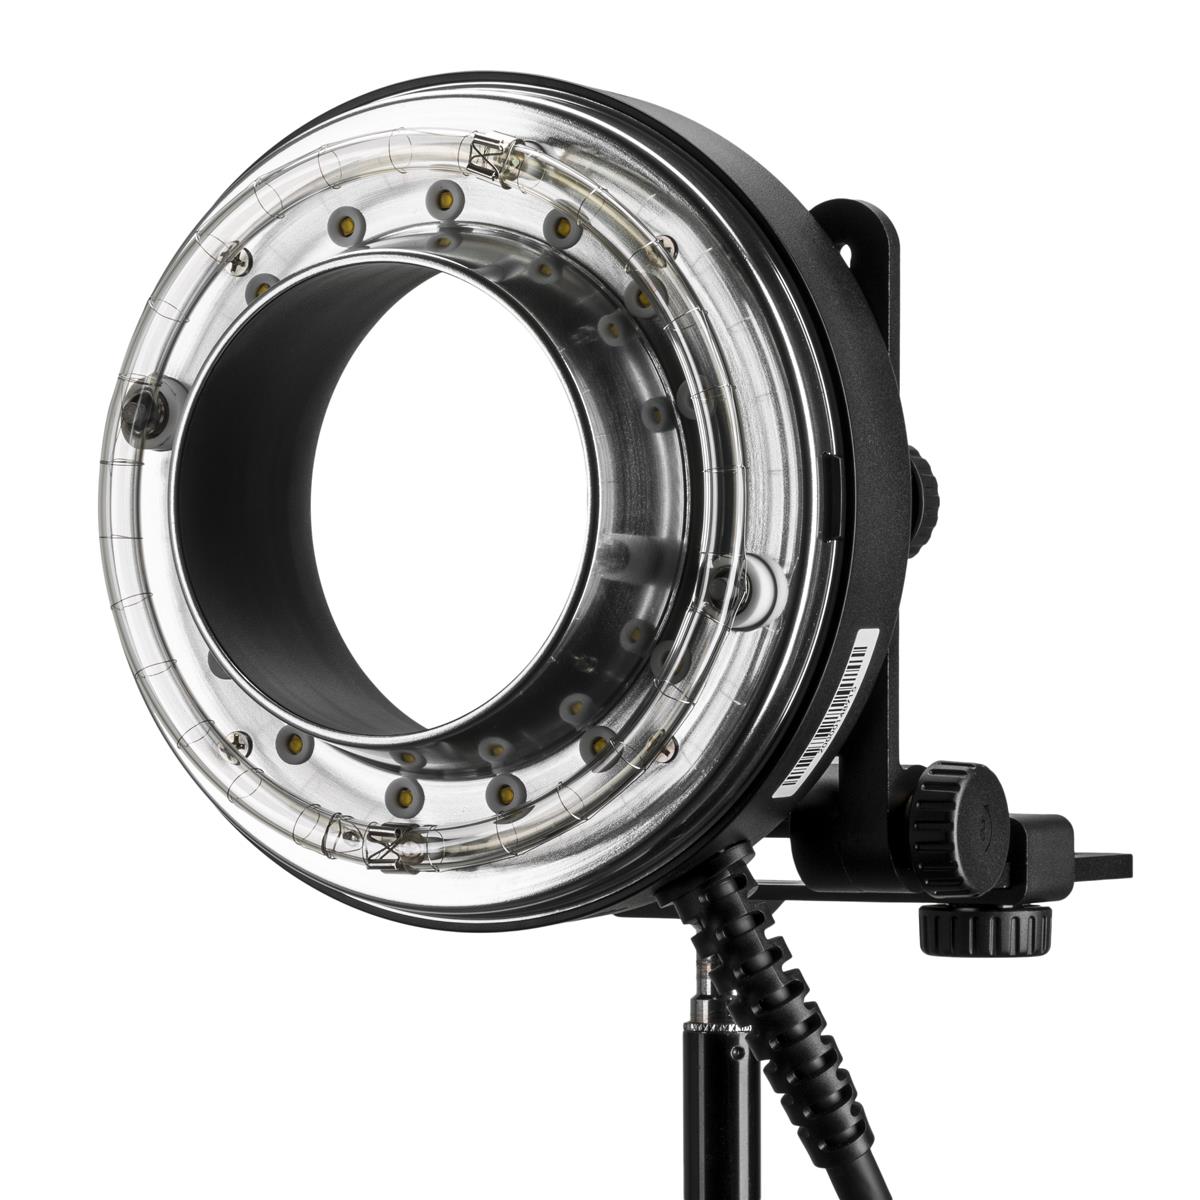 Image of Flashpoint R1200 Ring Flash Head for the XPLOR Power 1200 Pro